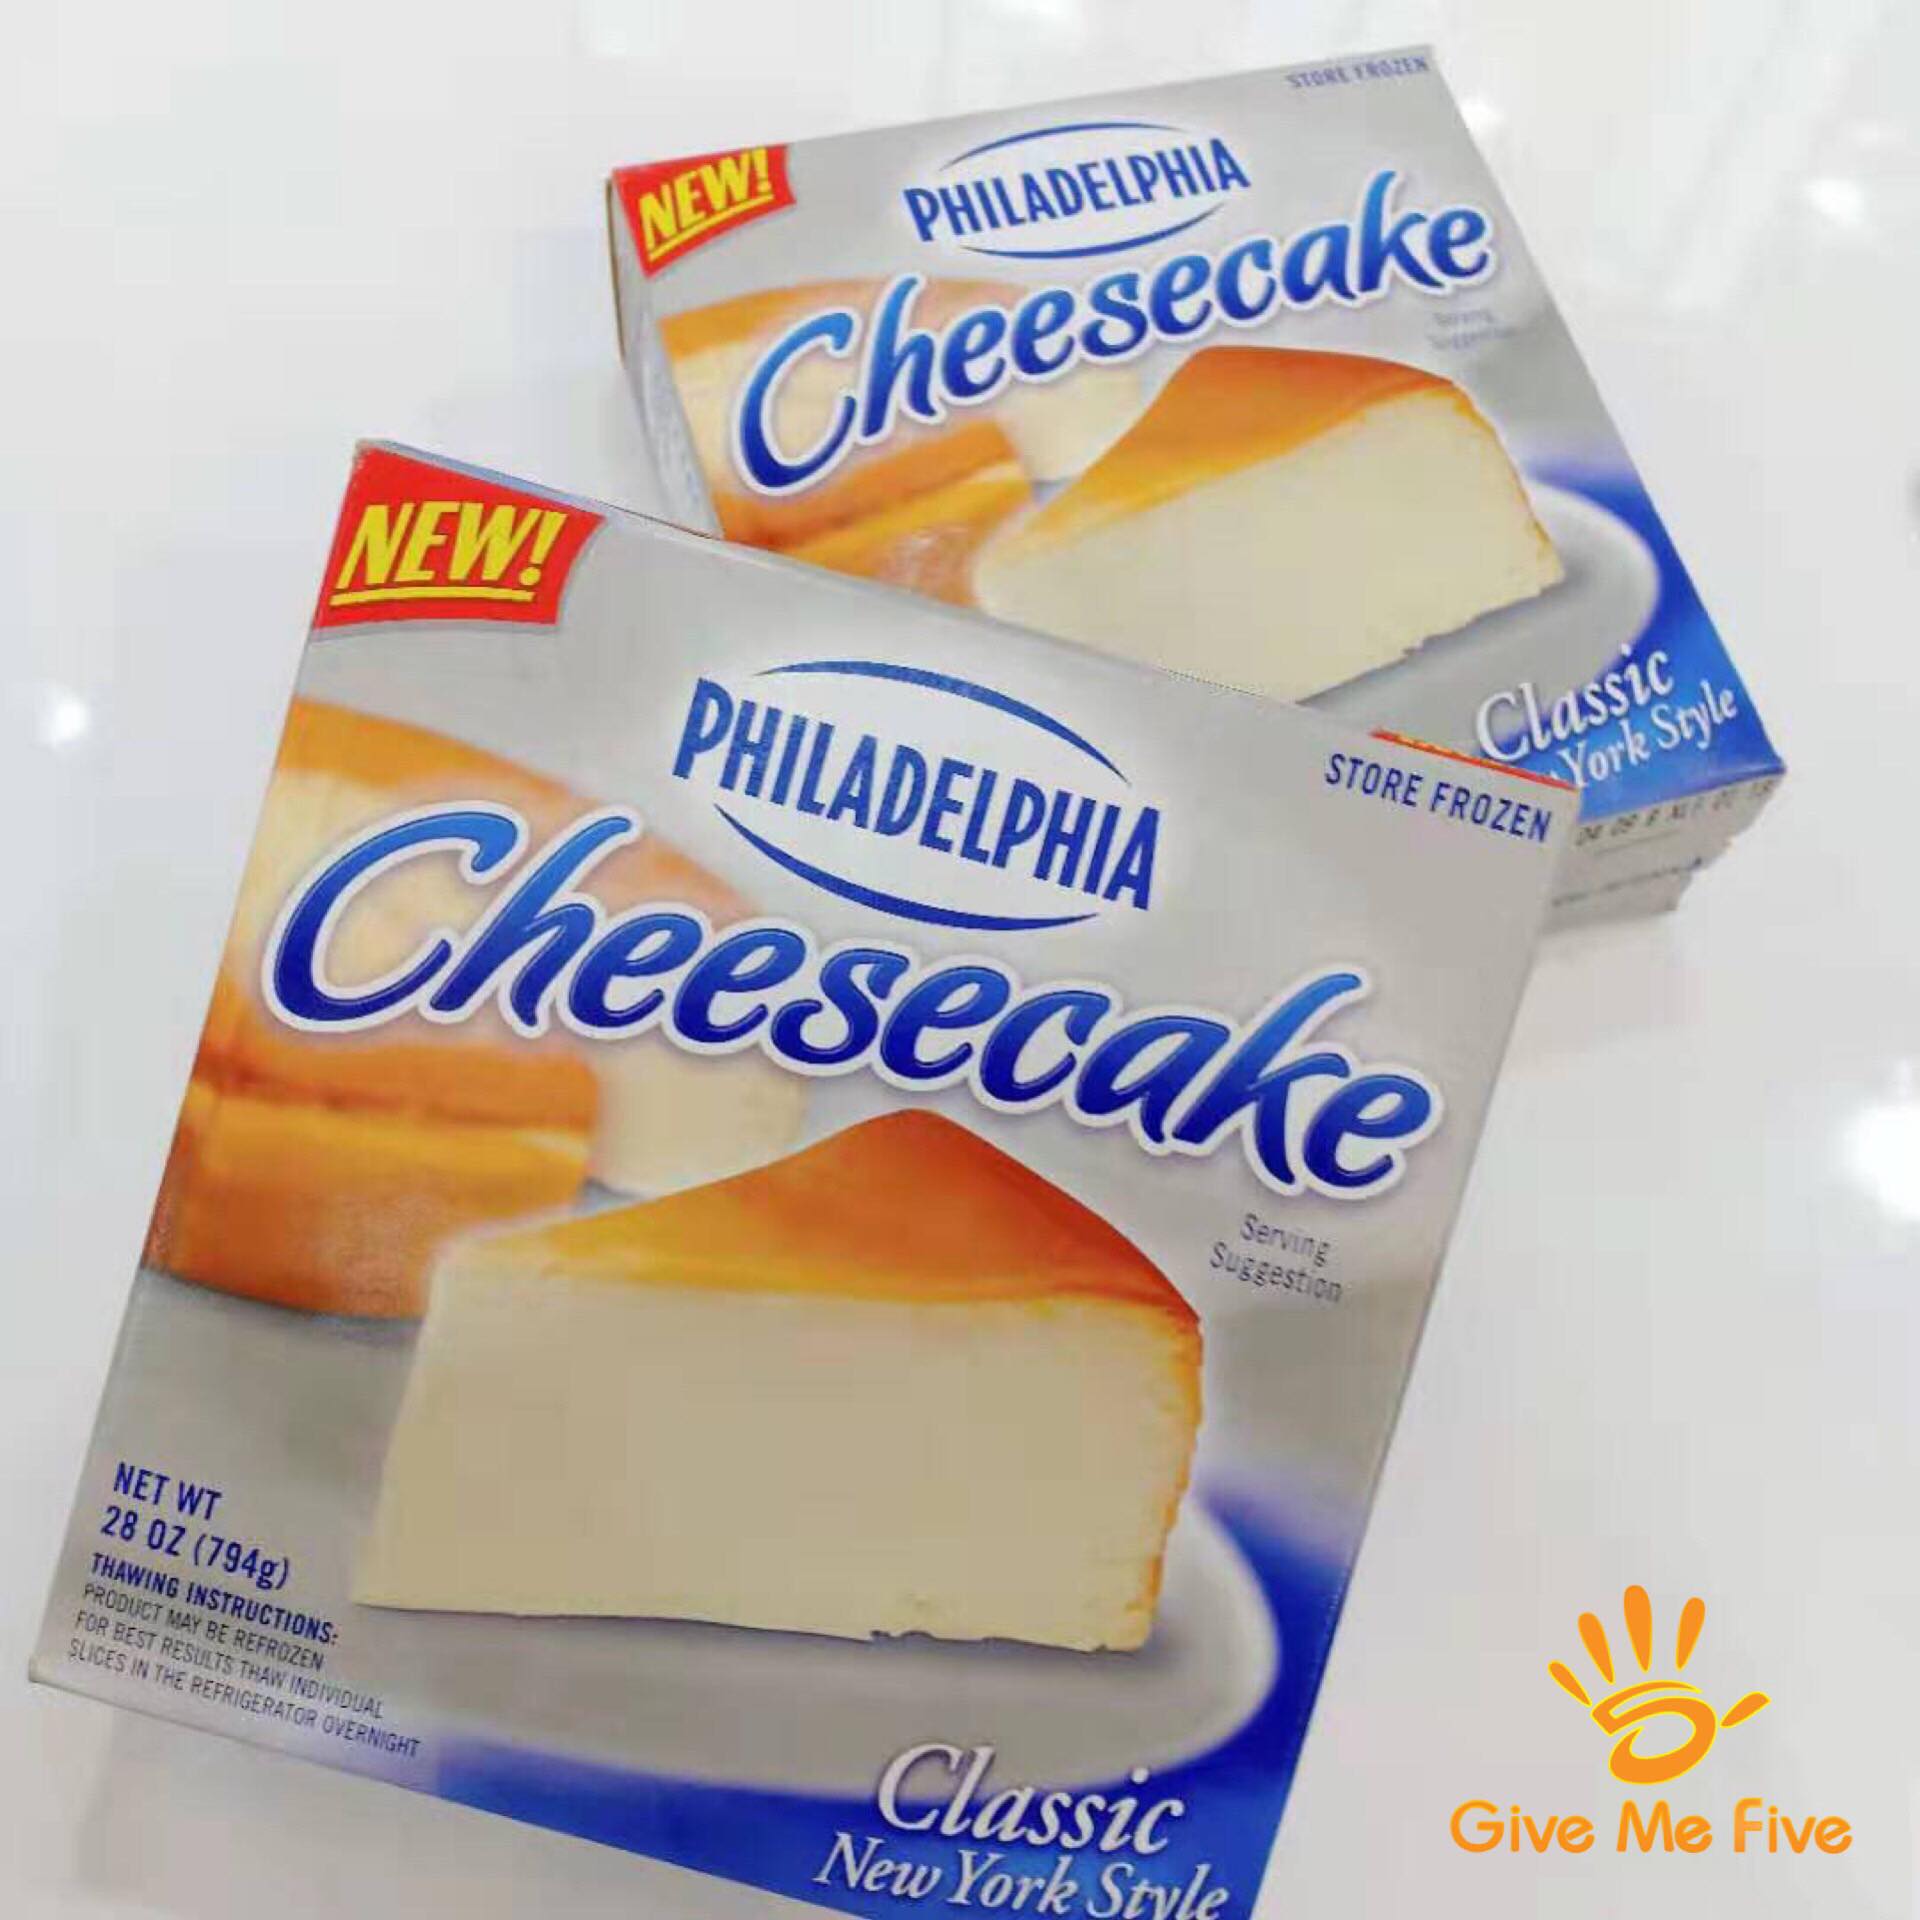 Philadelphia Cheesecake now available in JB